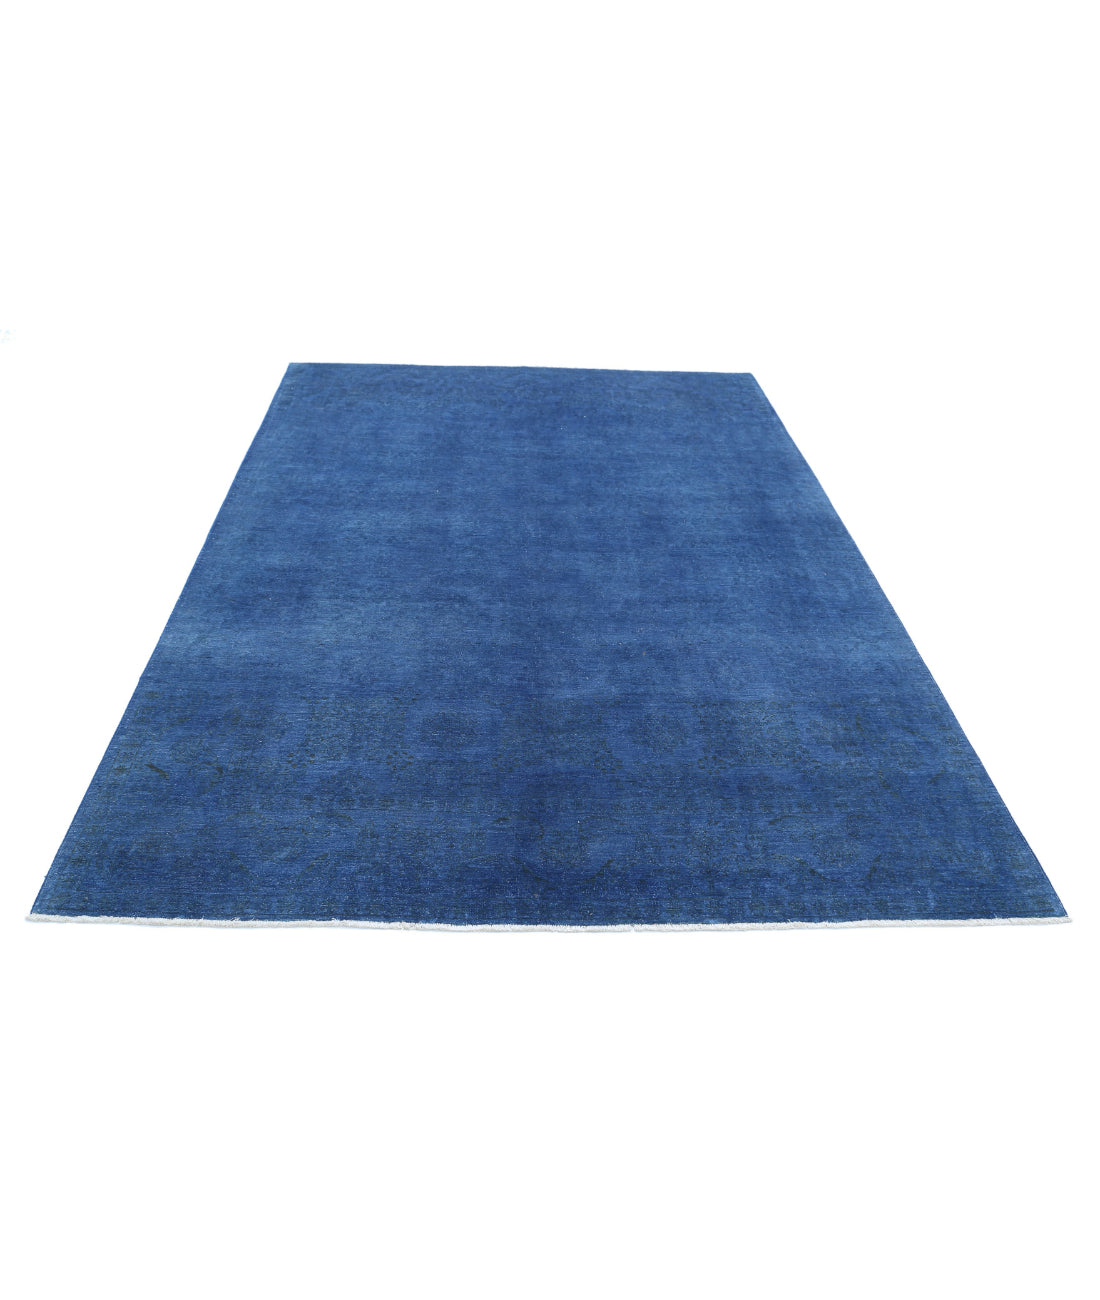 Hand Knotted Overdye Wool Rug - 6'3'' x 8'8'' 6'3'' x 8'8'' (188 X 260) / Blue / Blue